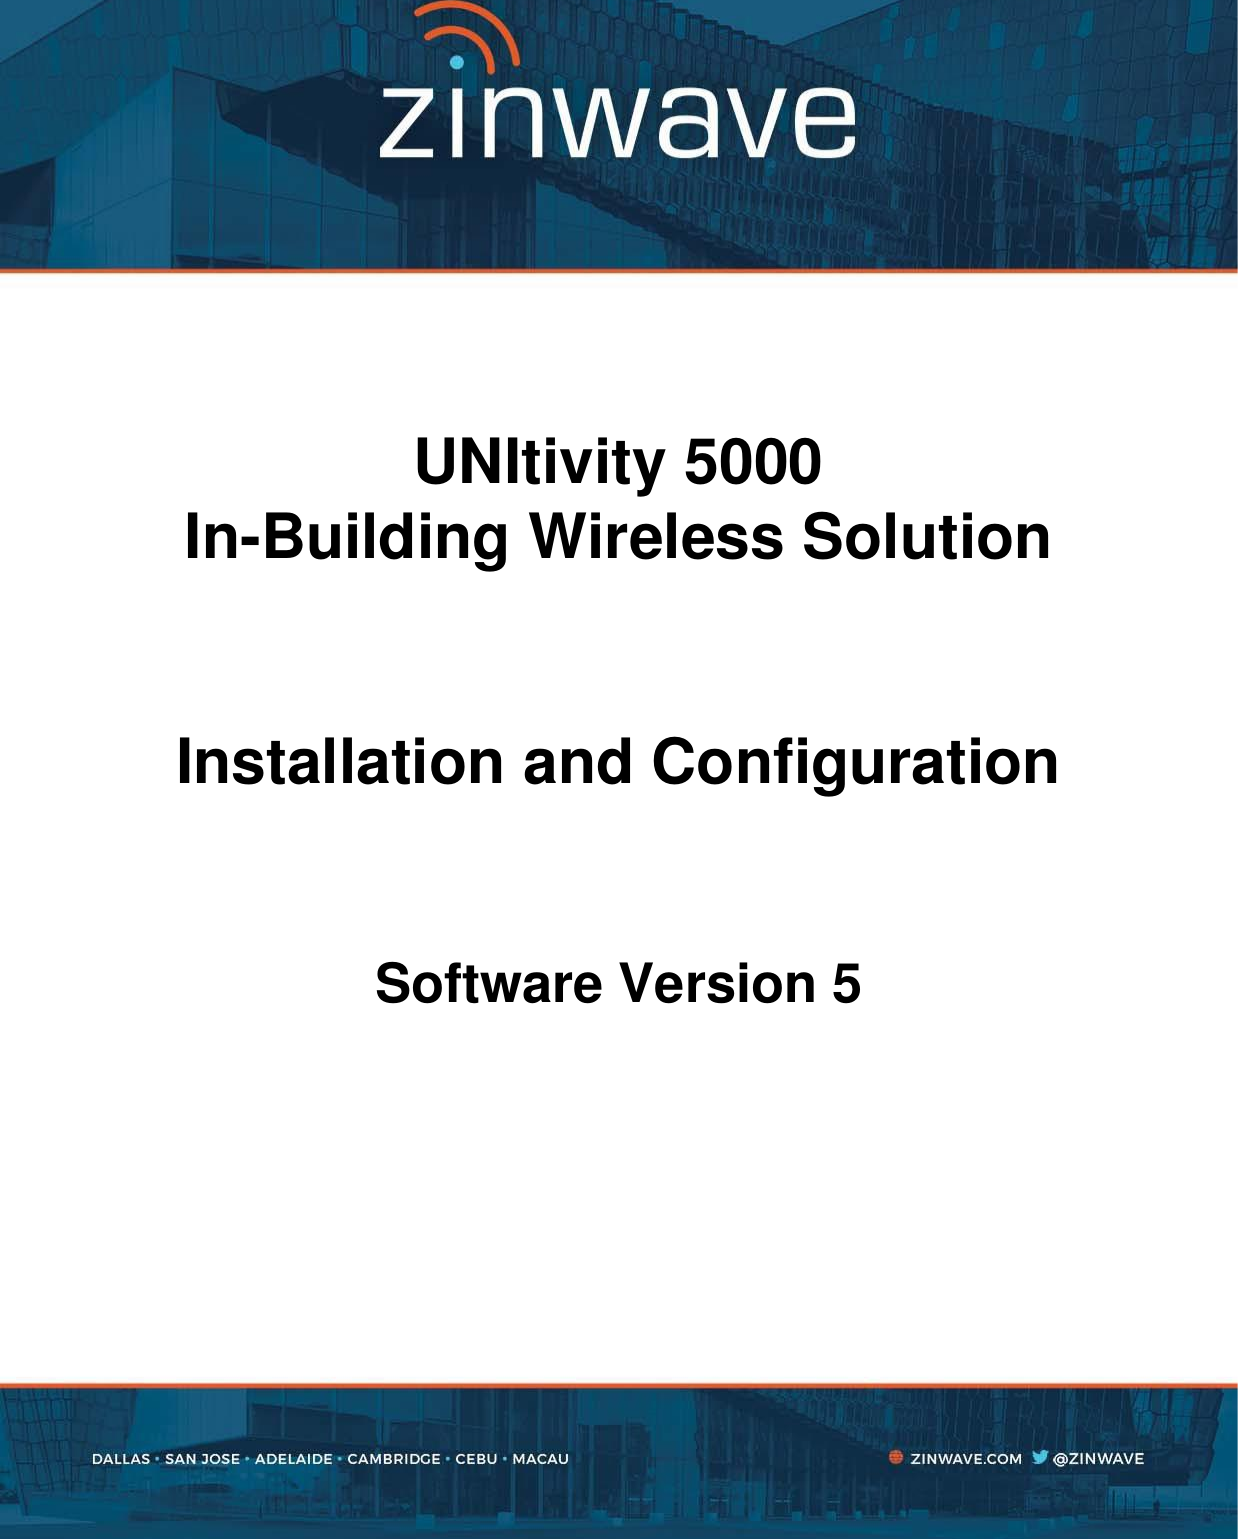                UNItivity 5000 In-Building Wireless Solution   Installation and Configuration   Software Version 5 